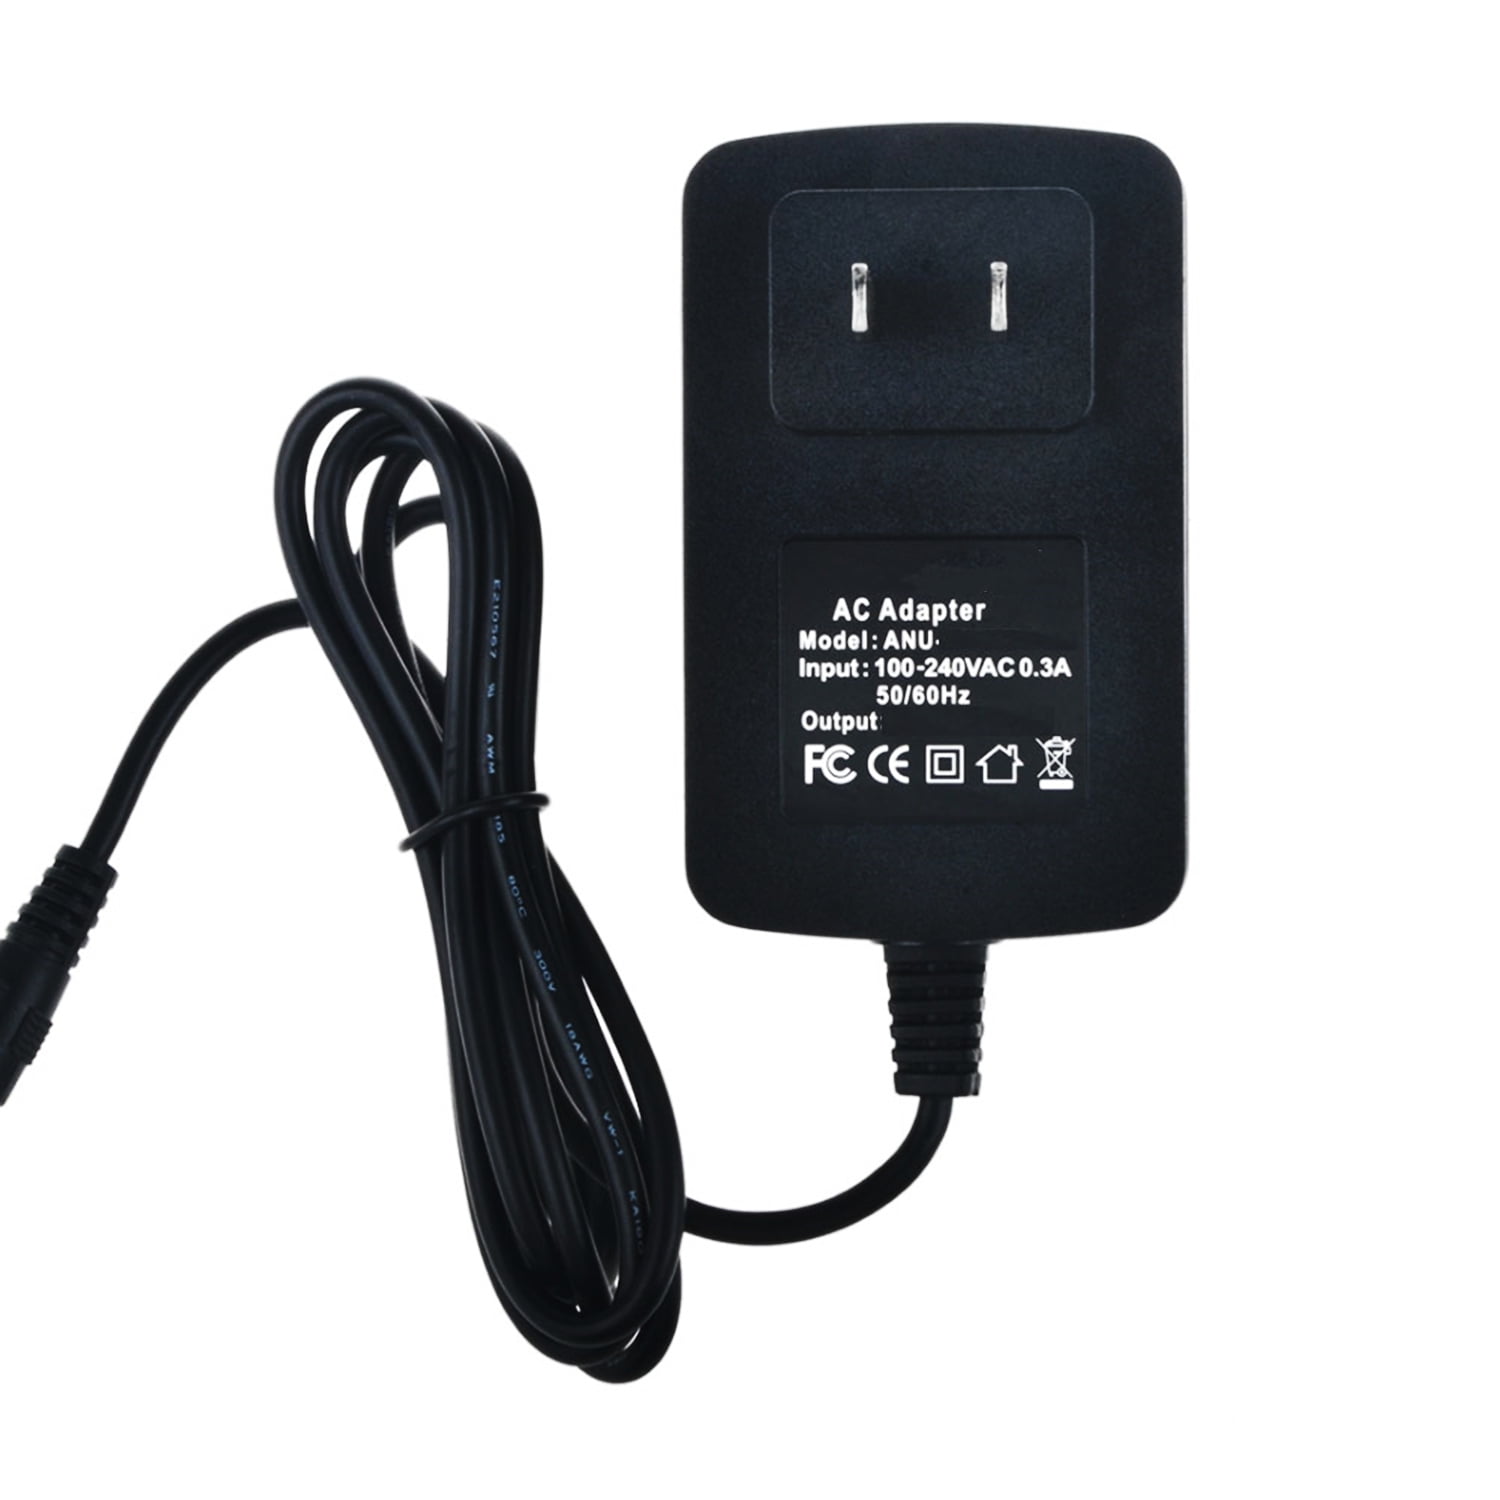 AC Adapter for Marineland GPE402-120300D LED Light Switching Mode Power Supply 